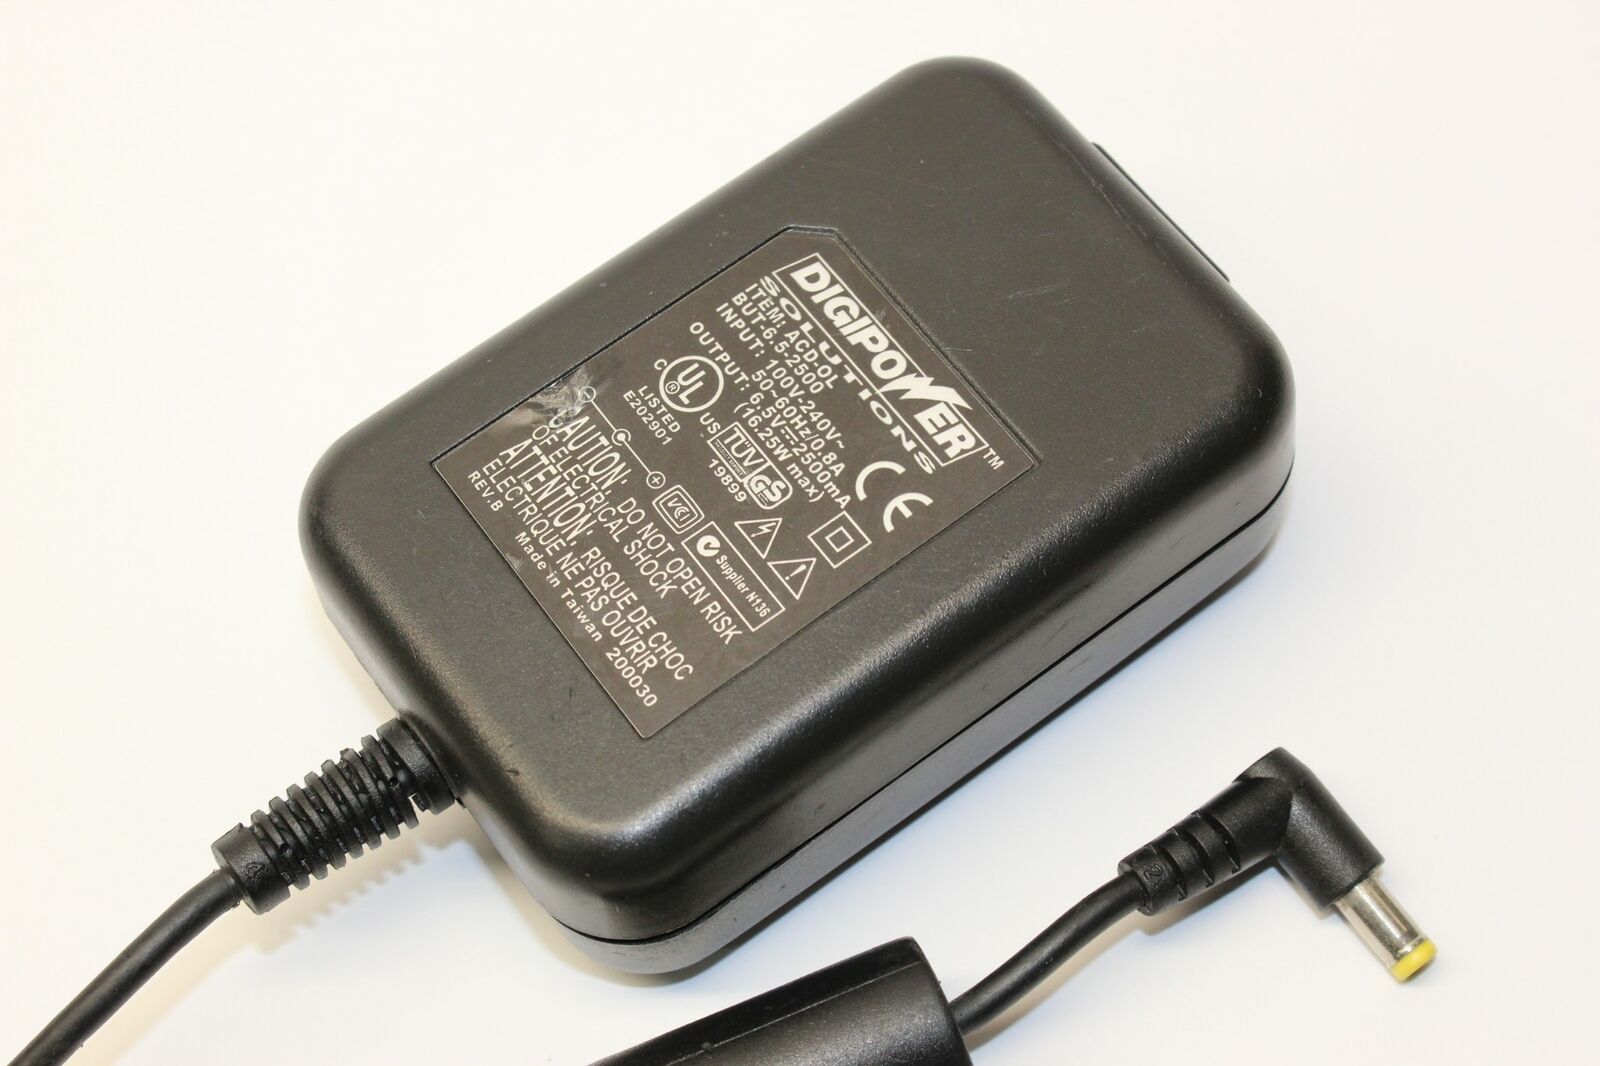 New 6.5V 2.5A Digipower ACD-0L Power Supply Ac Adapter